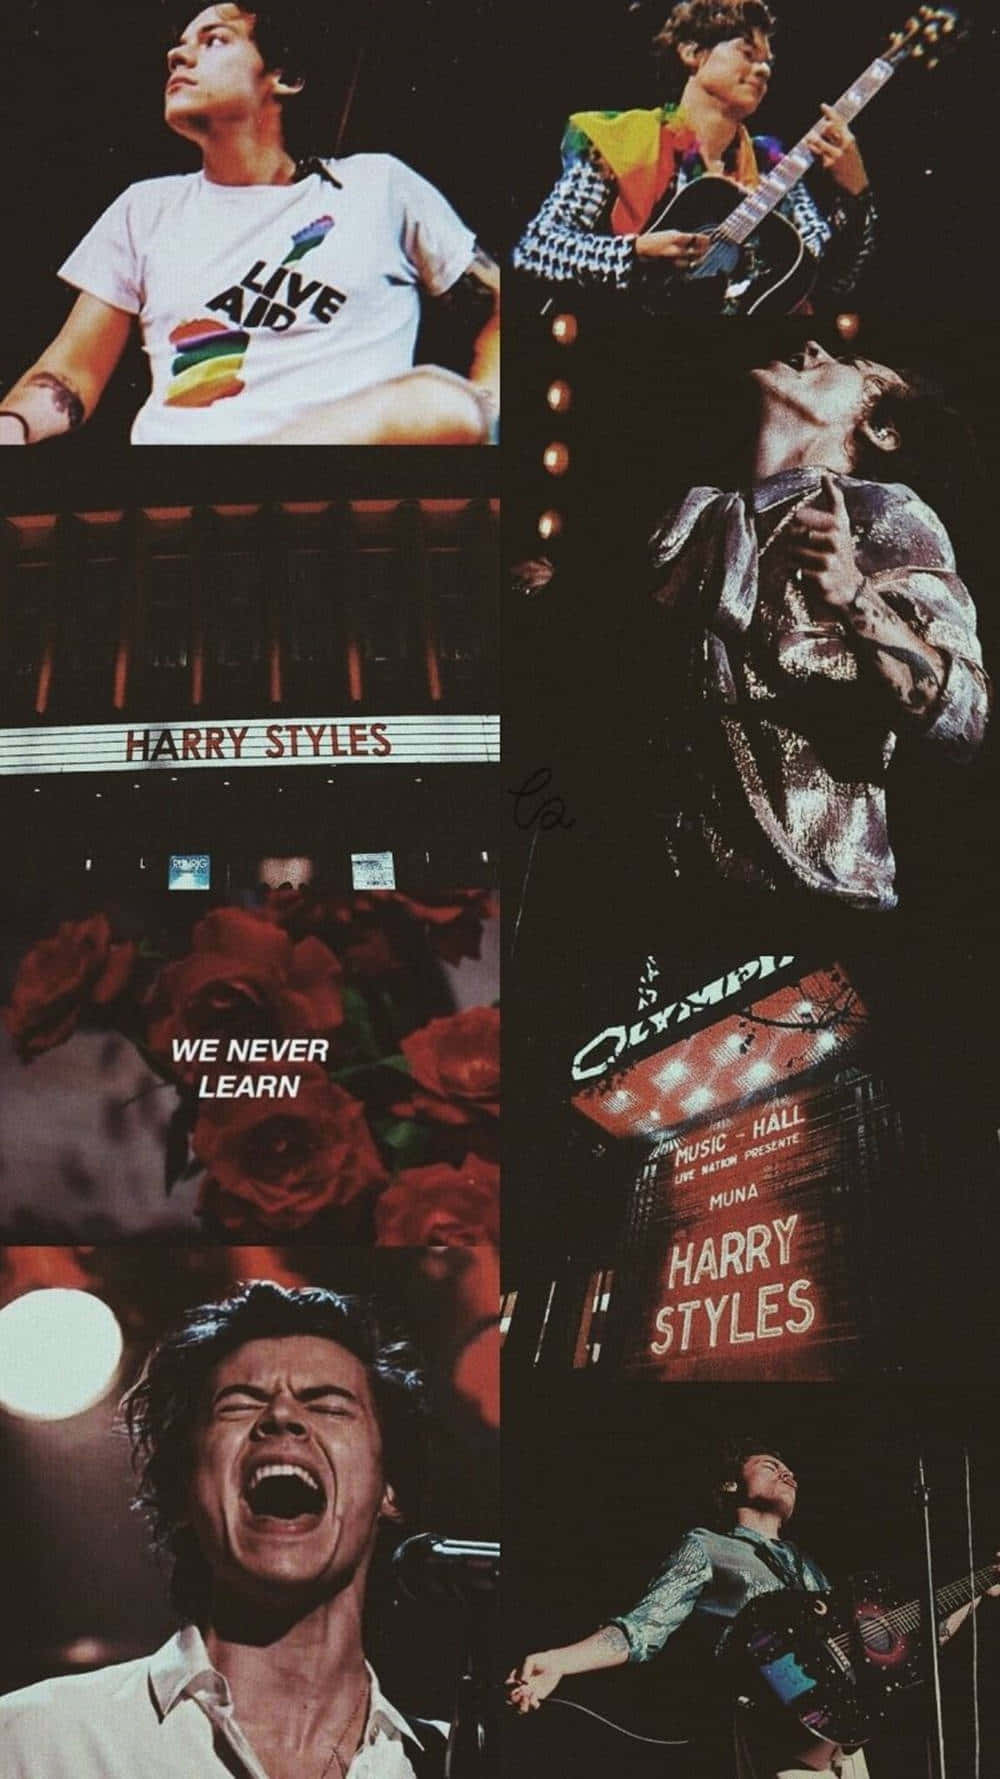 Embrace Harry Styles' music in this stunning collage! Wallpaper